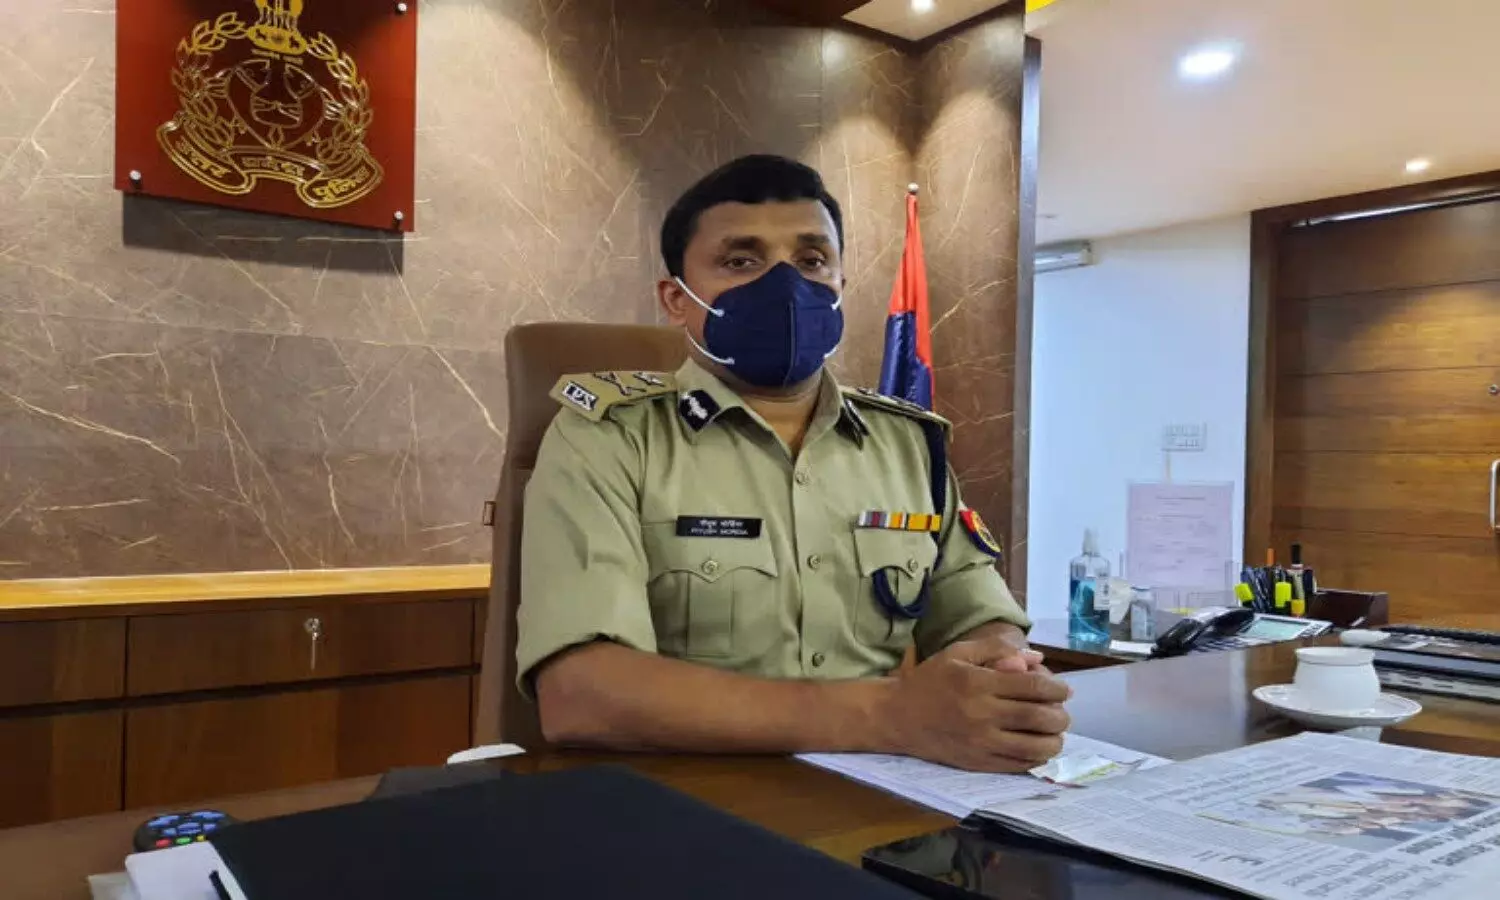 Joint Commissioner Police Piyush Mordia